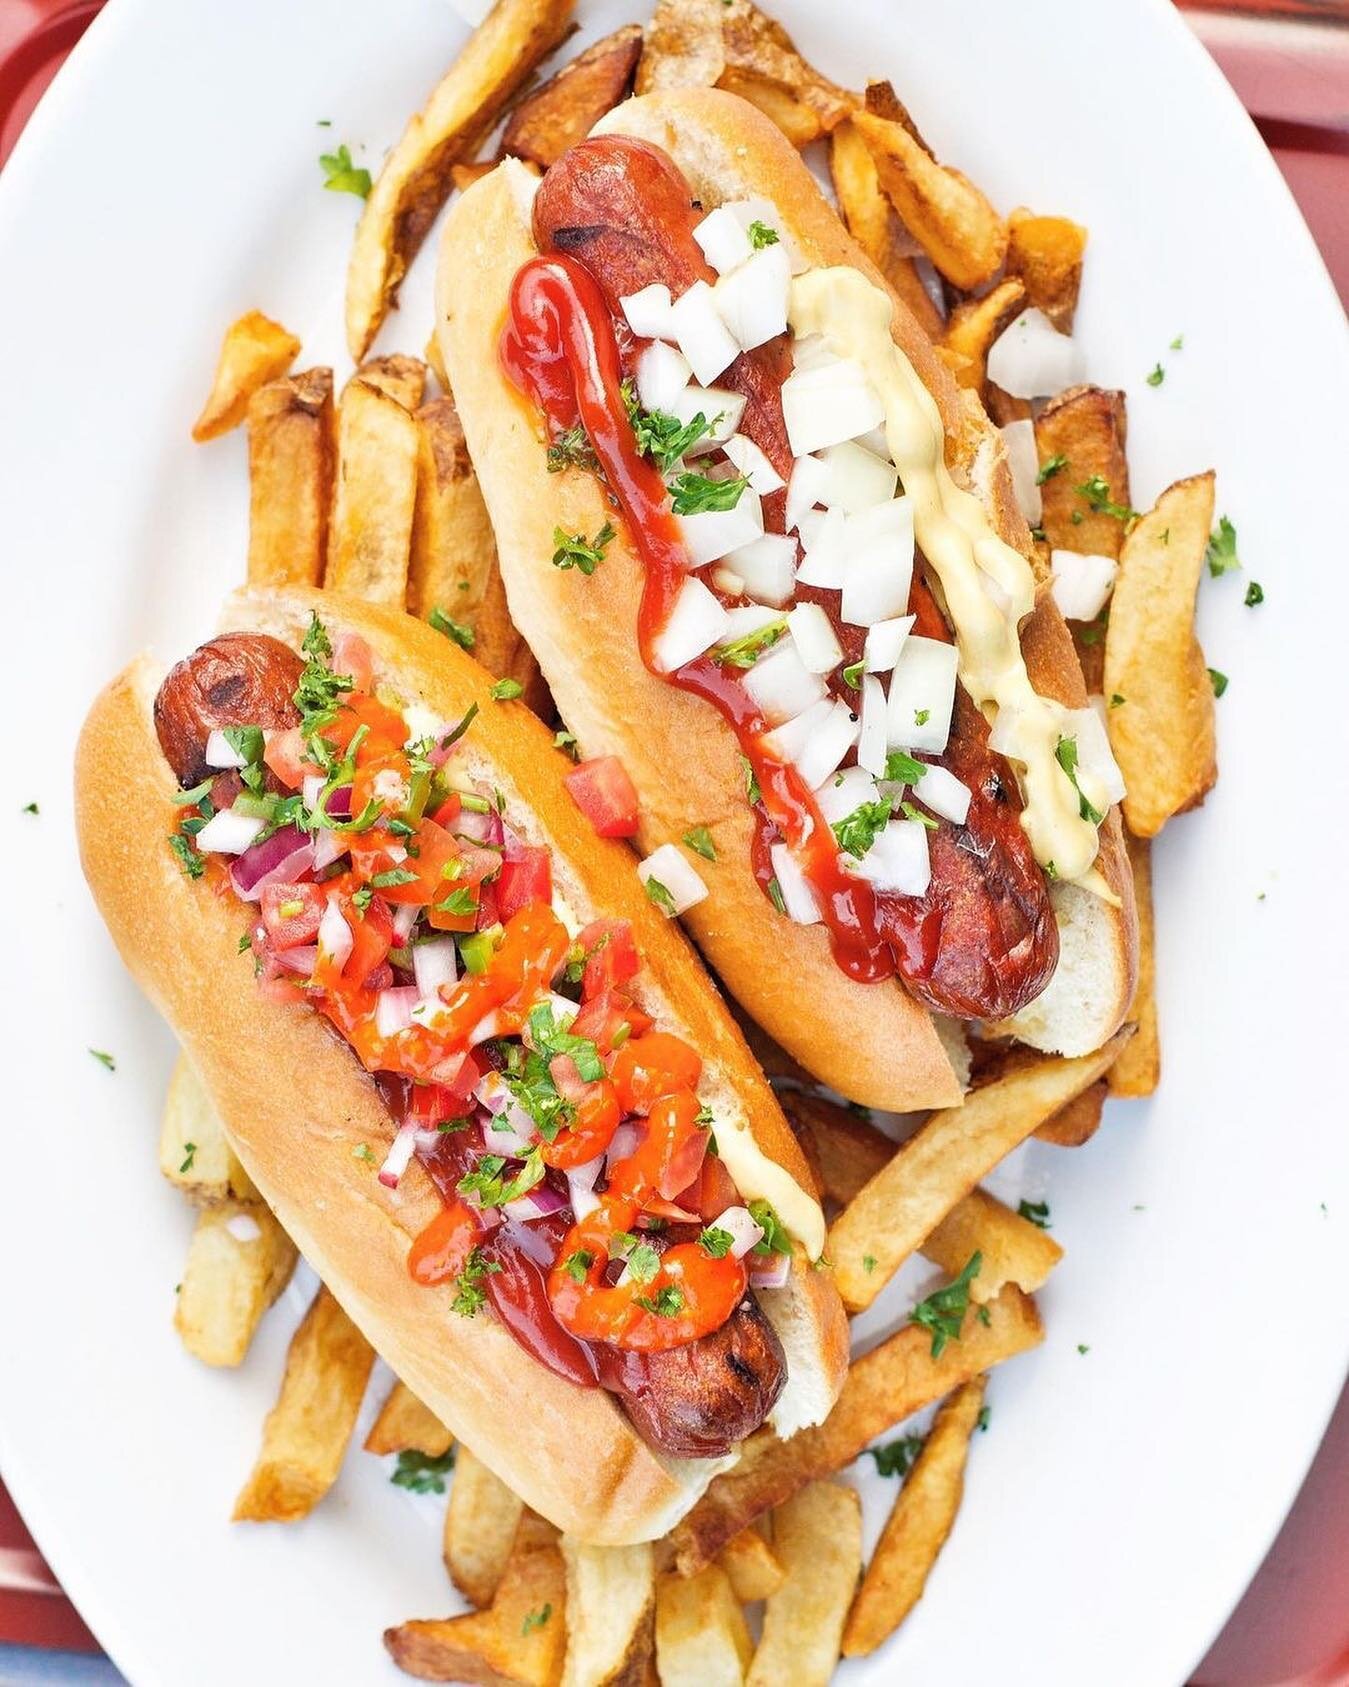 We&rsquo;re OPEN and these #halfsmokes are callin&rsquo; your name tonight 🌭🌭🤤🤤 Come see us or order takeout online at www.barelenadc.com 〰️ delivery available via @grubhub &amp; @ubereats! #dceats #dcfood #dinnertime #hungry #hstreet